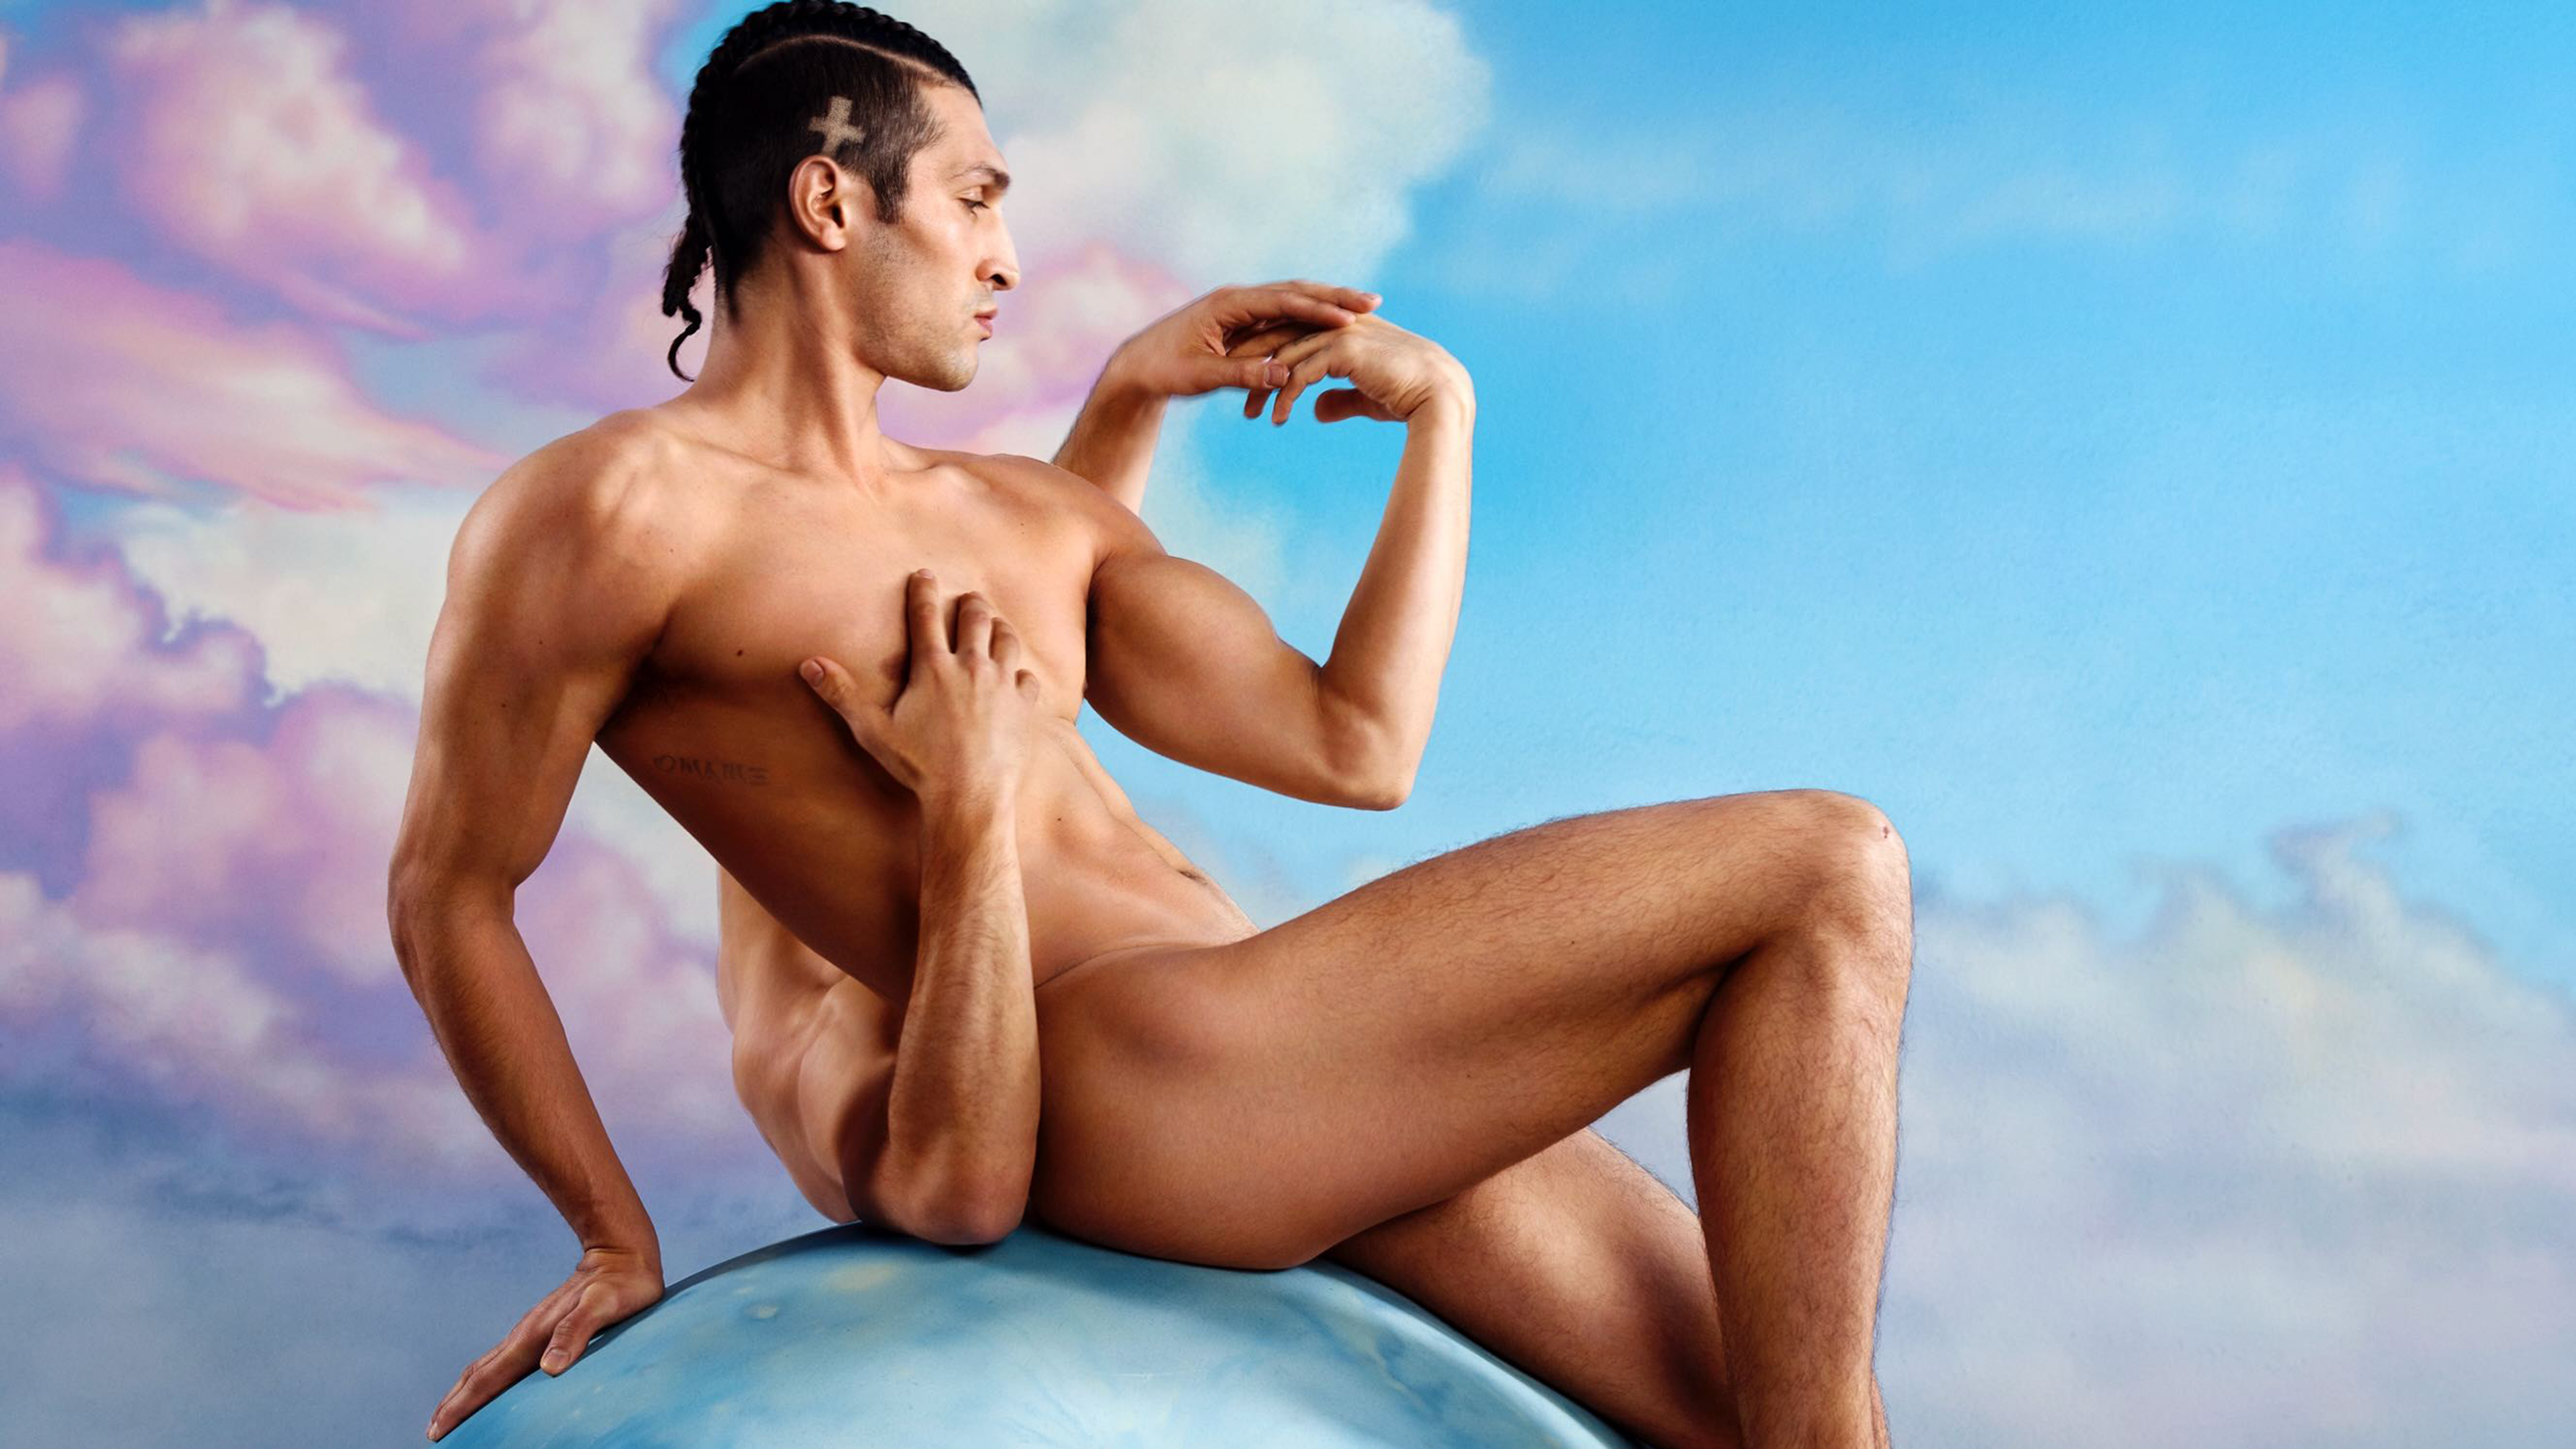 A photographic artwork of two nude men artistically posed on a blue sphere, with a vibrant sky in the background